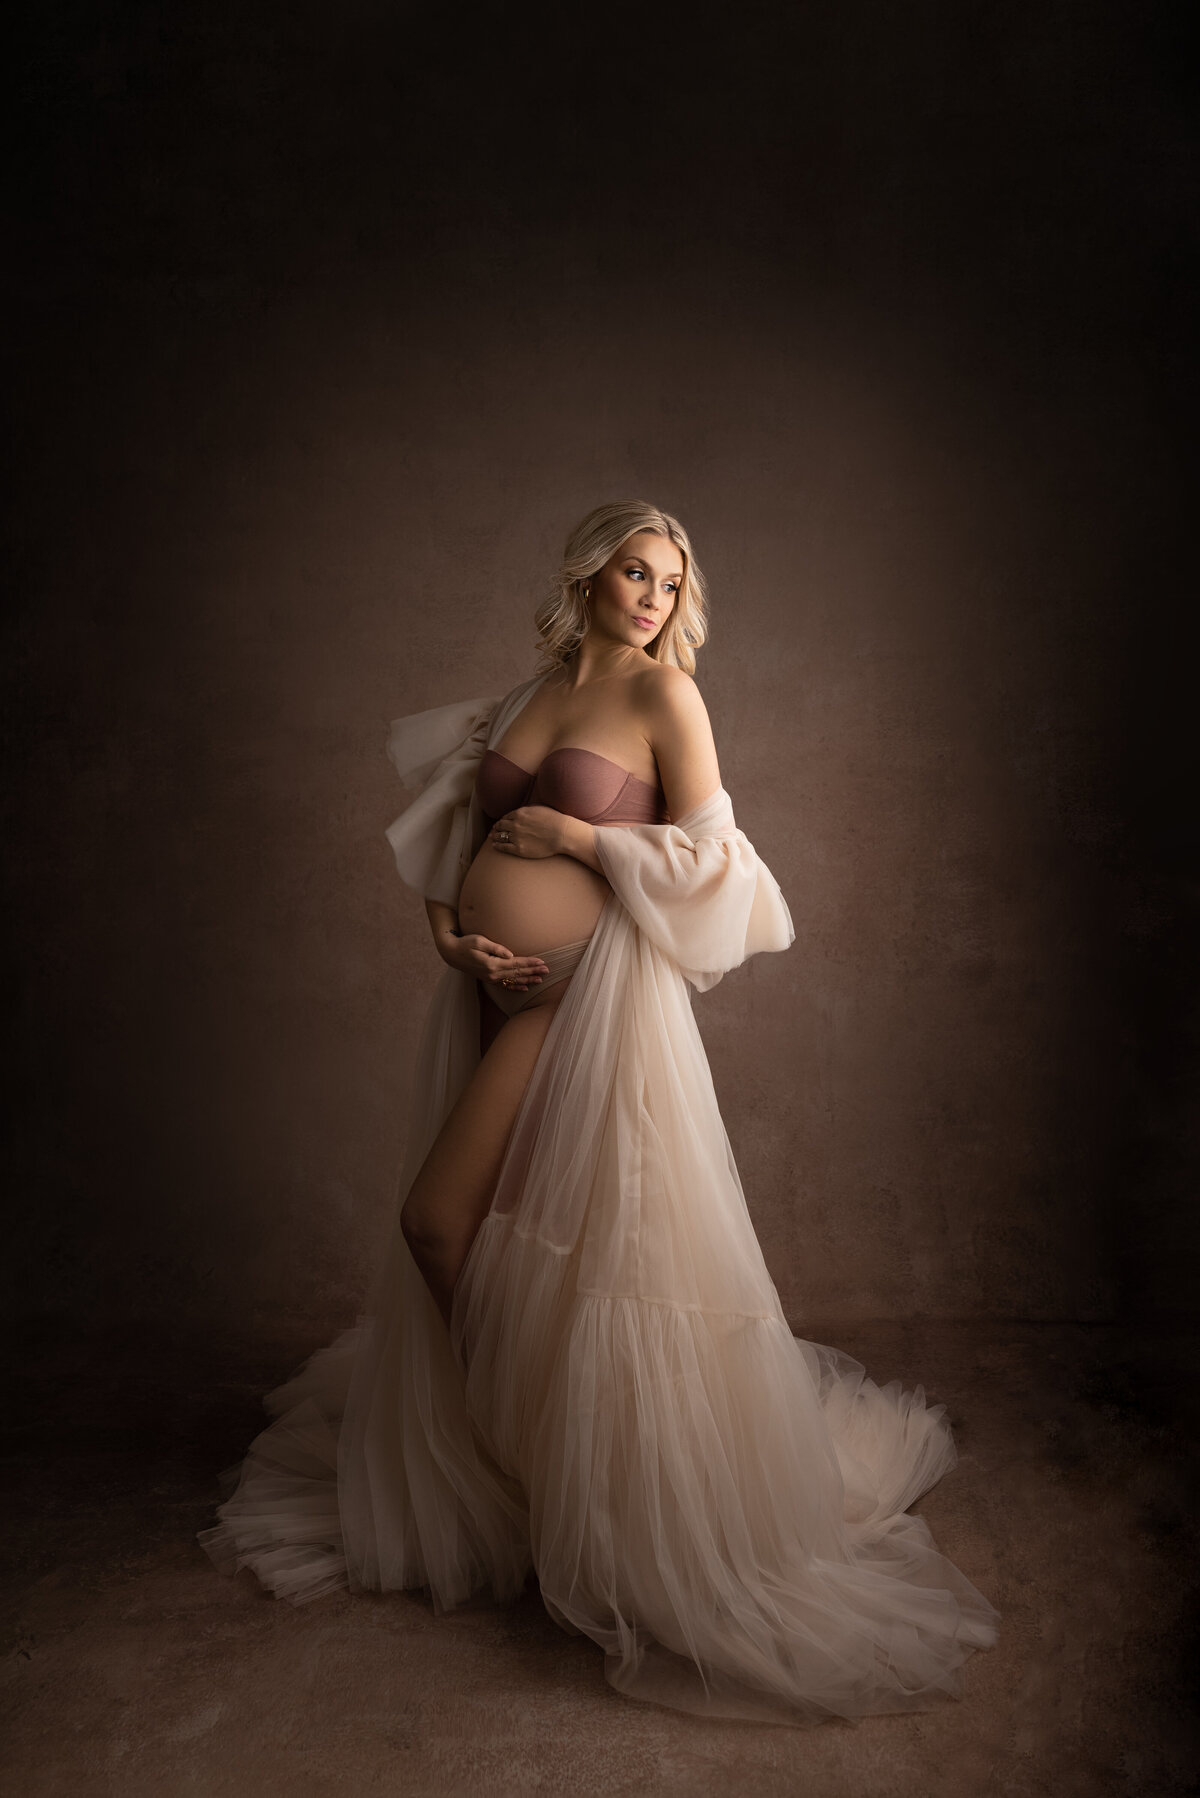 Captured by Katie Marshall, recognized as the best NJ maternity photographer, this striking maternity photo features a woman in a strapless taupe bra and panty set, adorned with an off-the-shoulder layered organza robe that creates a sense of volume and depth. The woman is gracefully angled away from the camera, with one knee gently bent. Her hands are artfully placed, one under her baby bump and the other over it, creating an intimate connection. She looks over her shoulder towards the light source, allowing her face to be enveloped in a soft and radiant glow, resulting in a powerful and emotive maternity portrait.